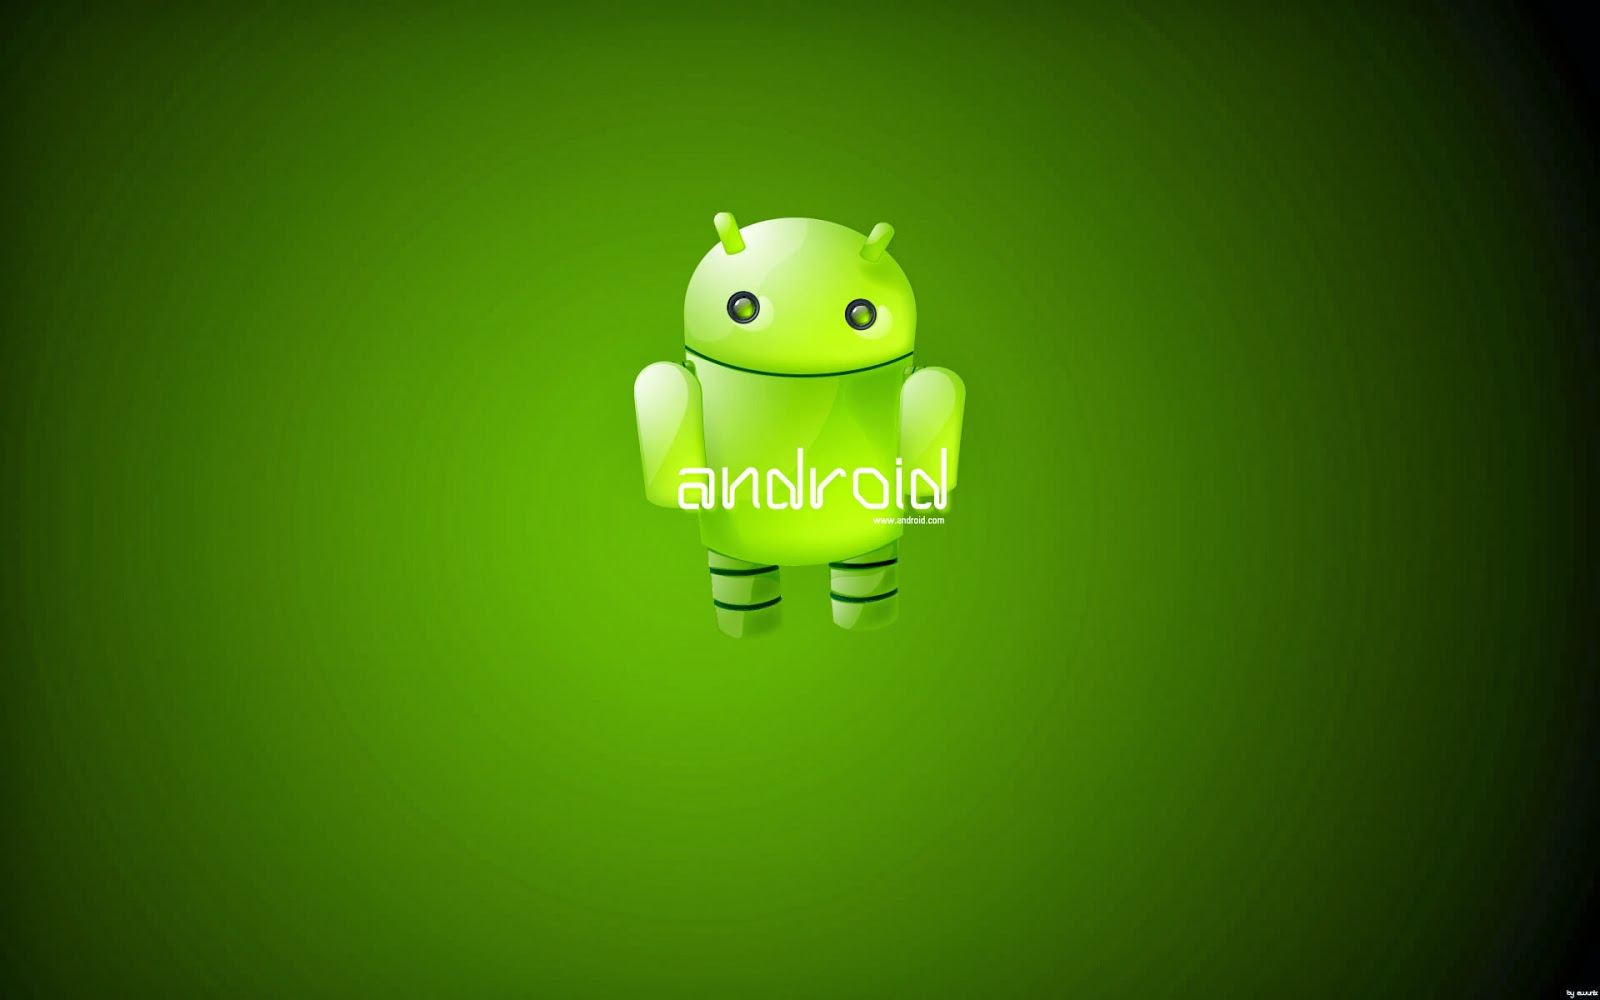  Android hd wallpapers and make this Android hd wallpaper s for your